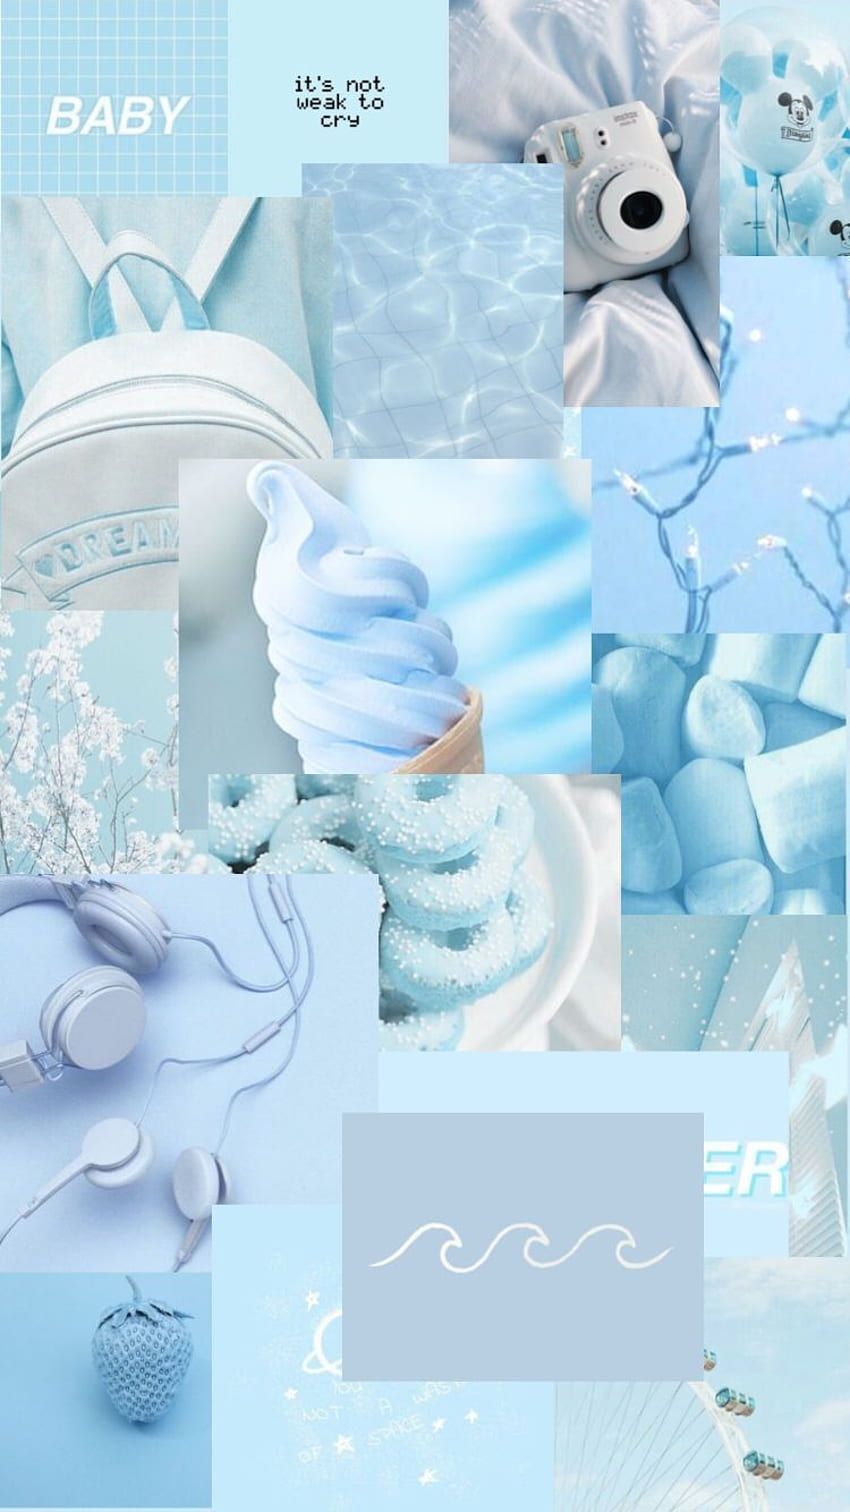 Aesthetic blue background with polaroids, sweets, and ice cream - Blue, light blue